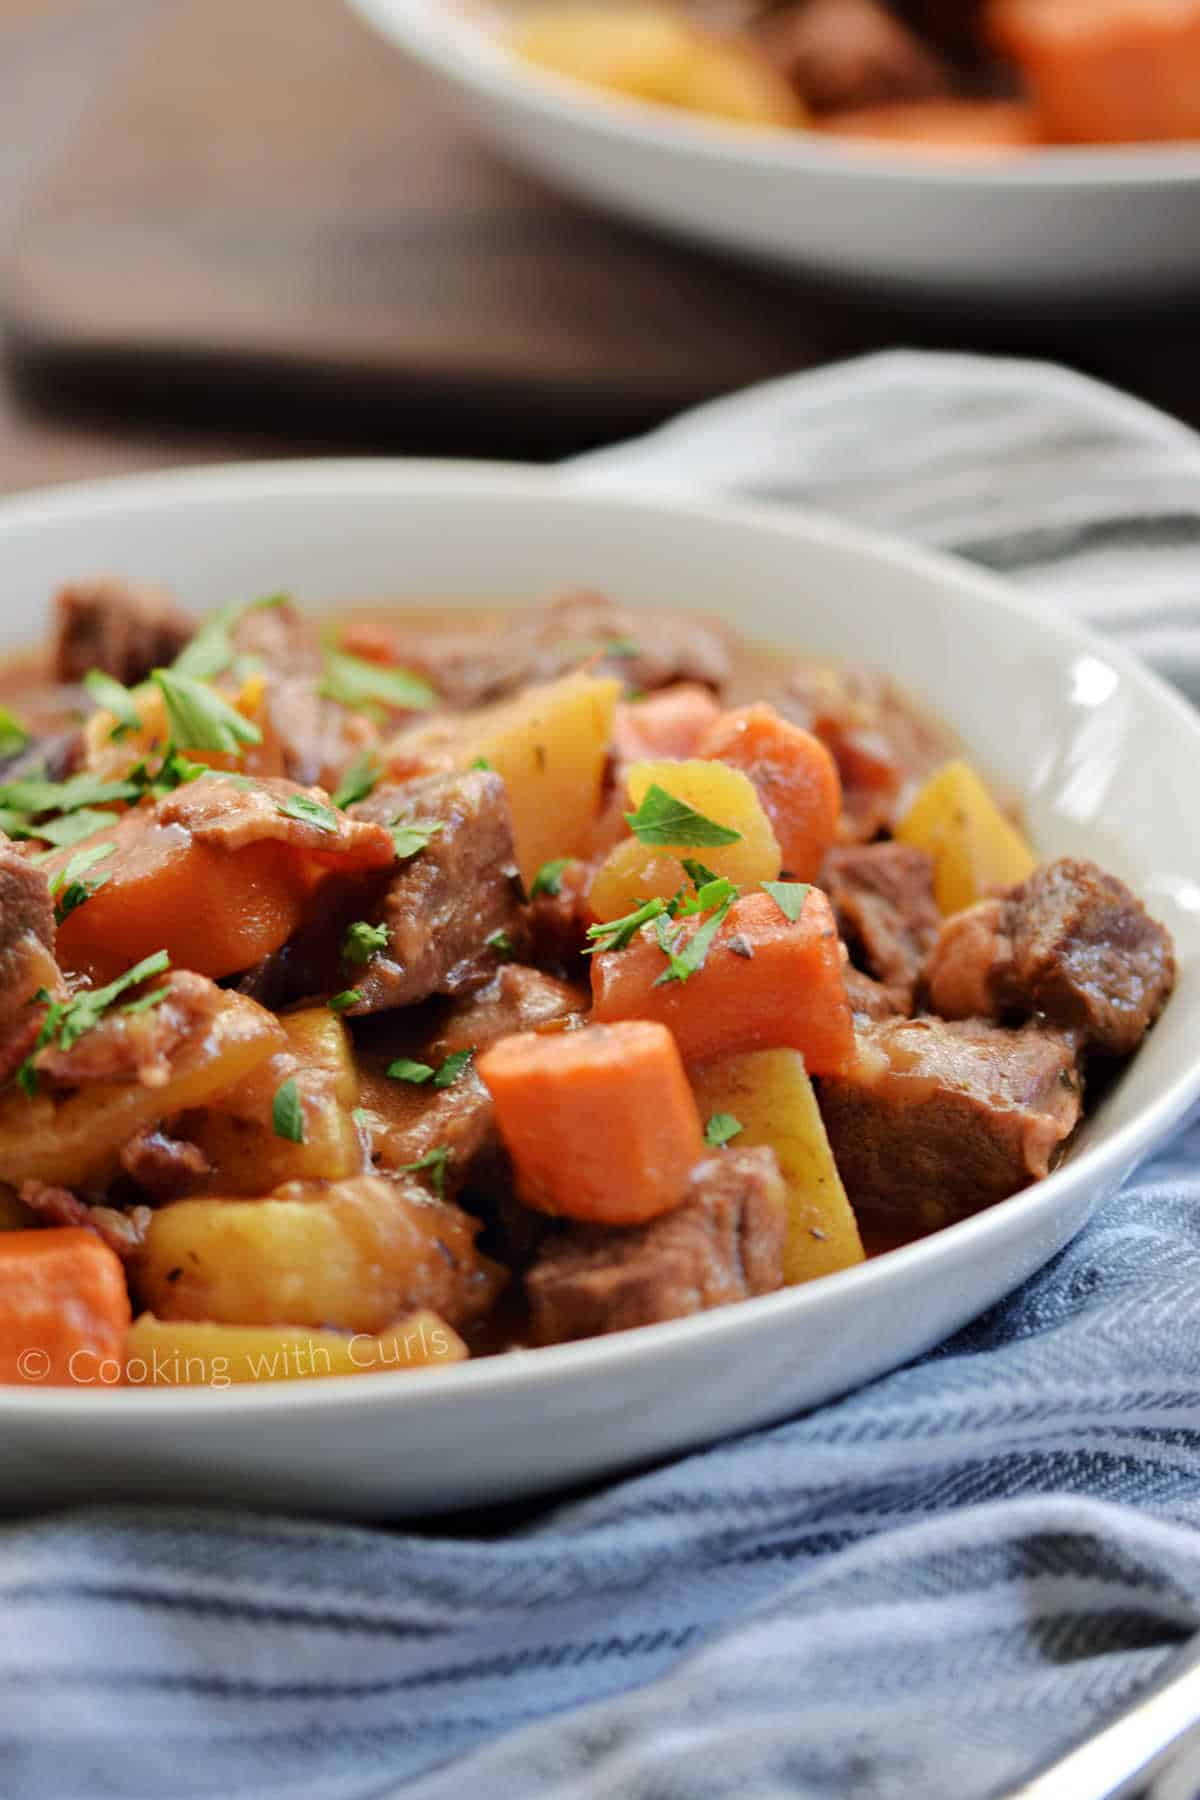 A bowl of Guinness beef stew with carrots and potatoes.